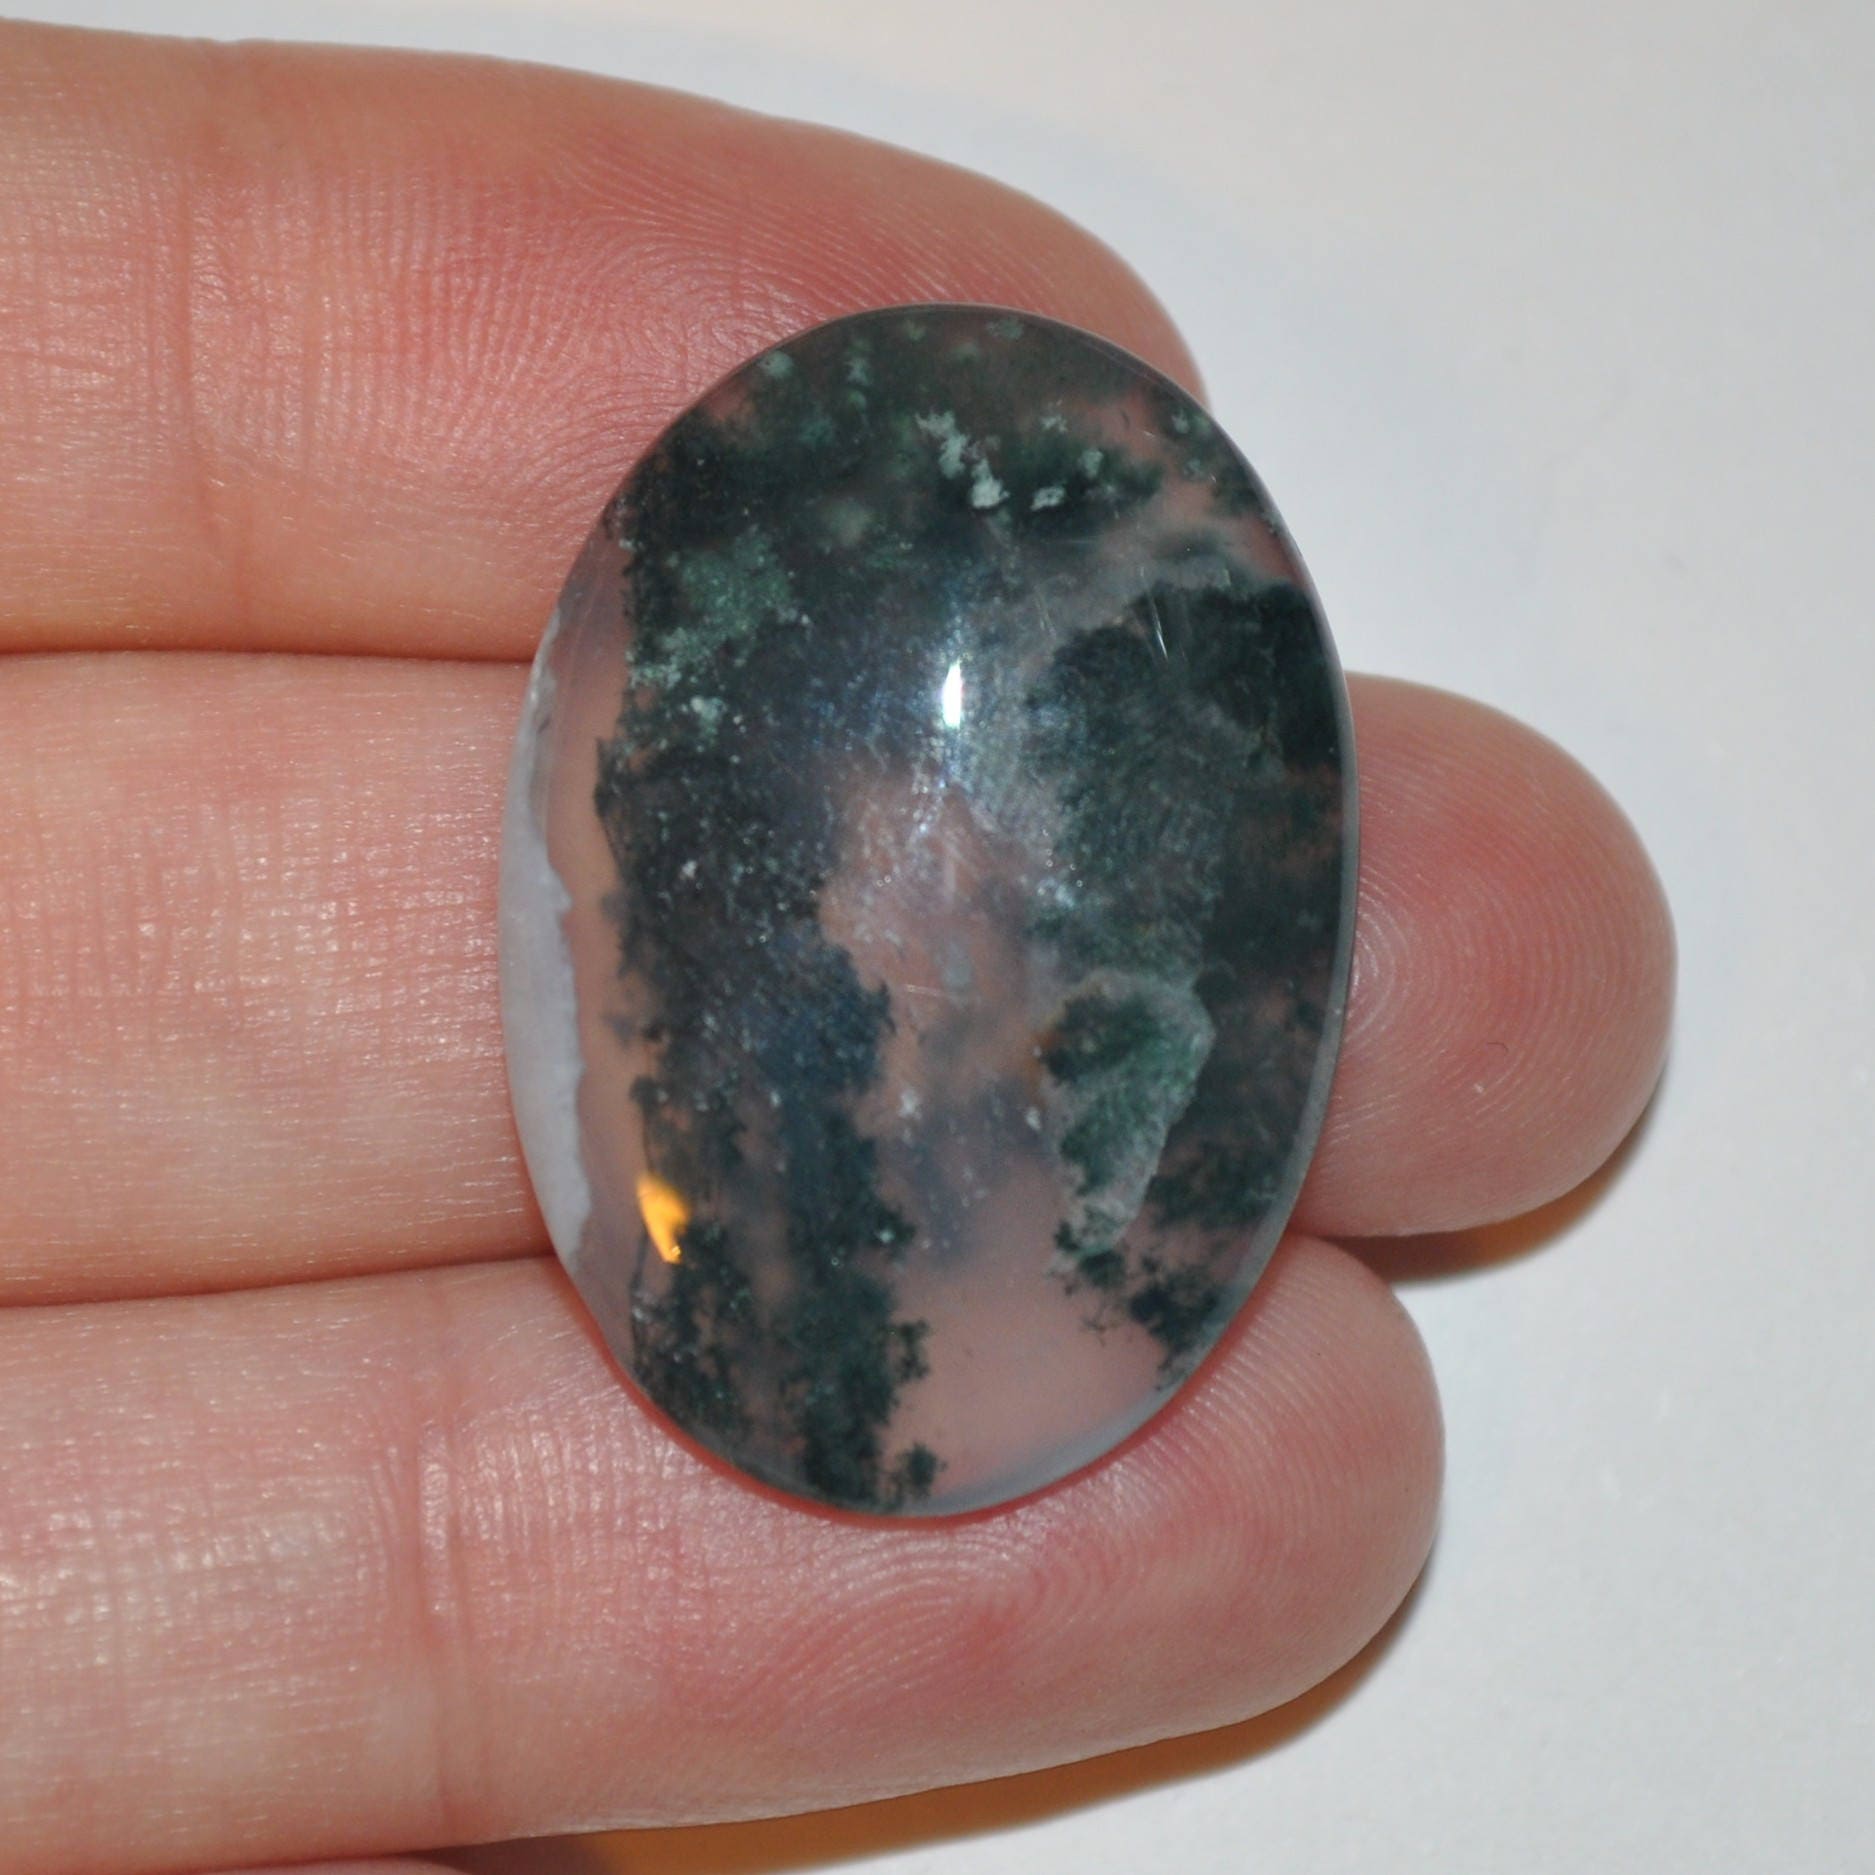 21.8cts Natural Moss Agate Cabochon, Moss Agate Stone, Loose Stone